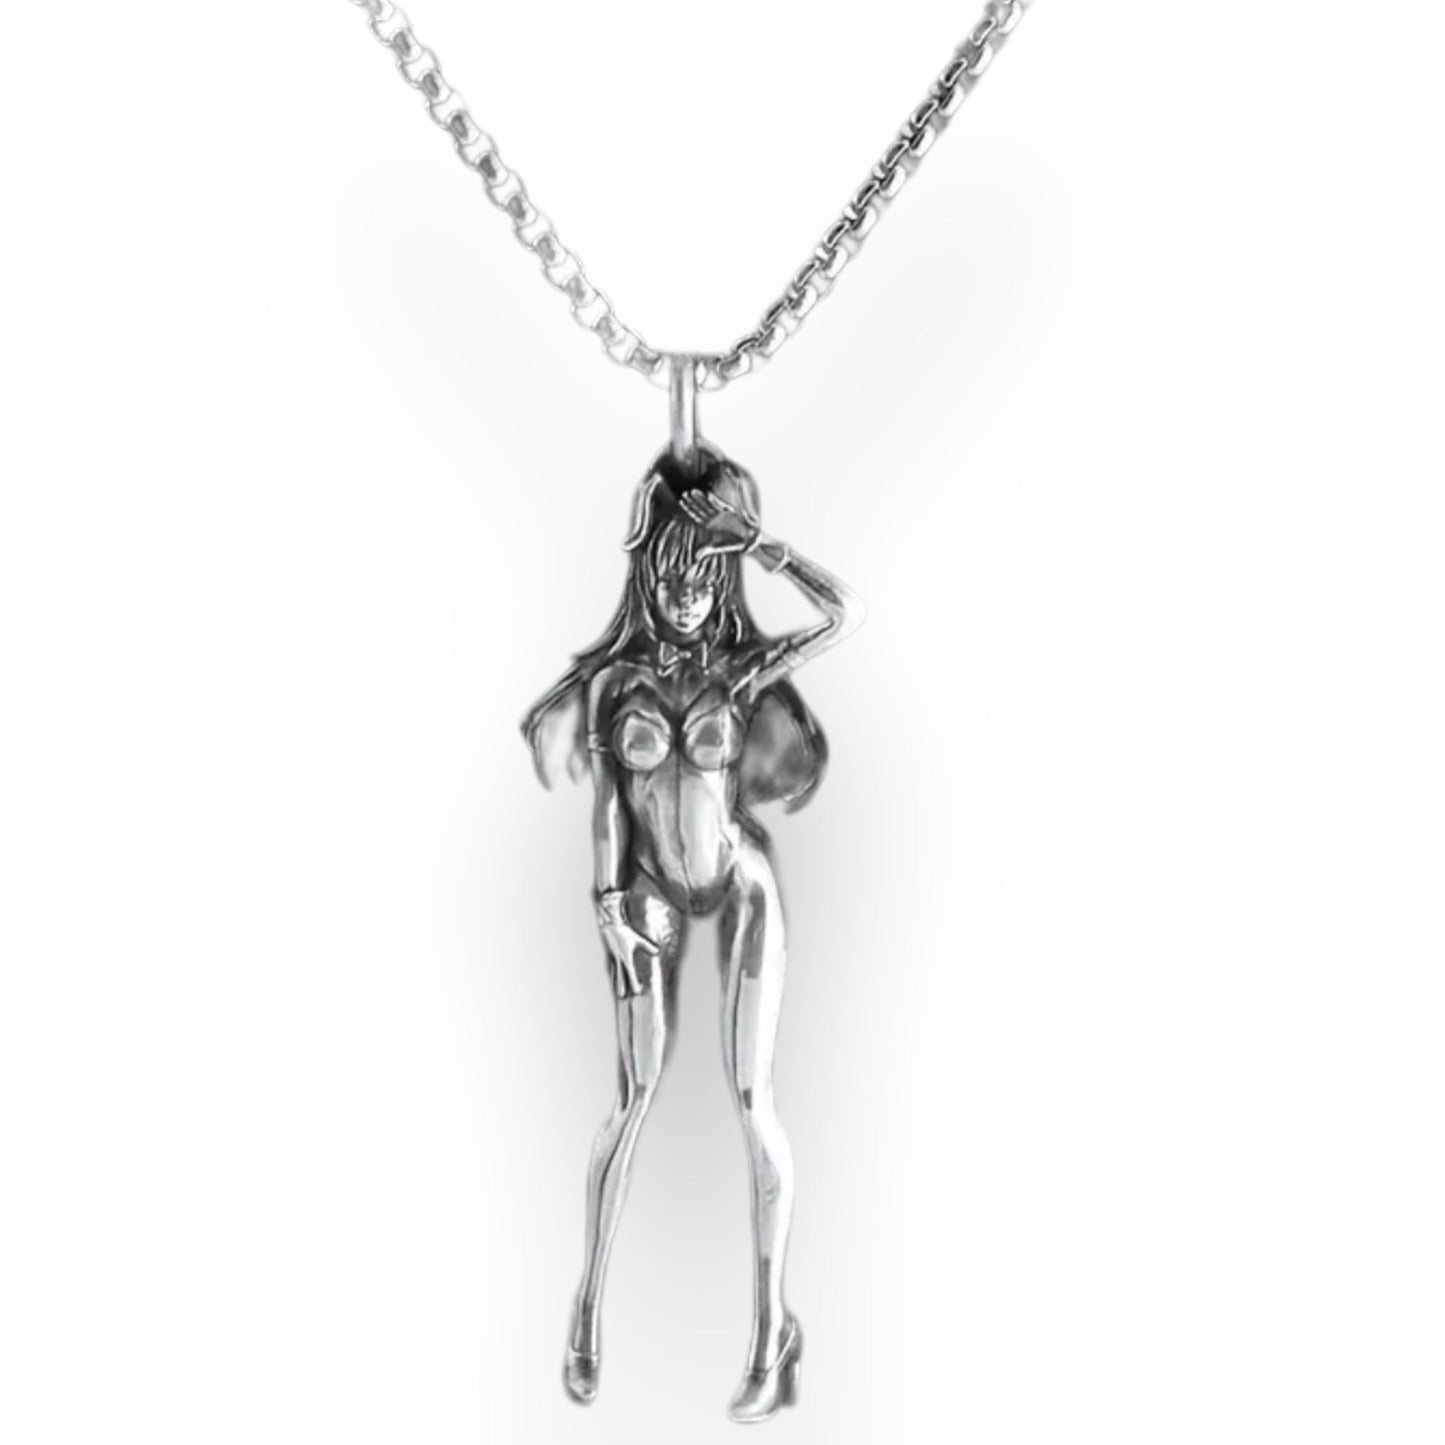 Sexy Women Necklace with Exclusive Feminine Pendant - Seductive Accessory for Elegant Style